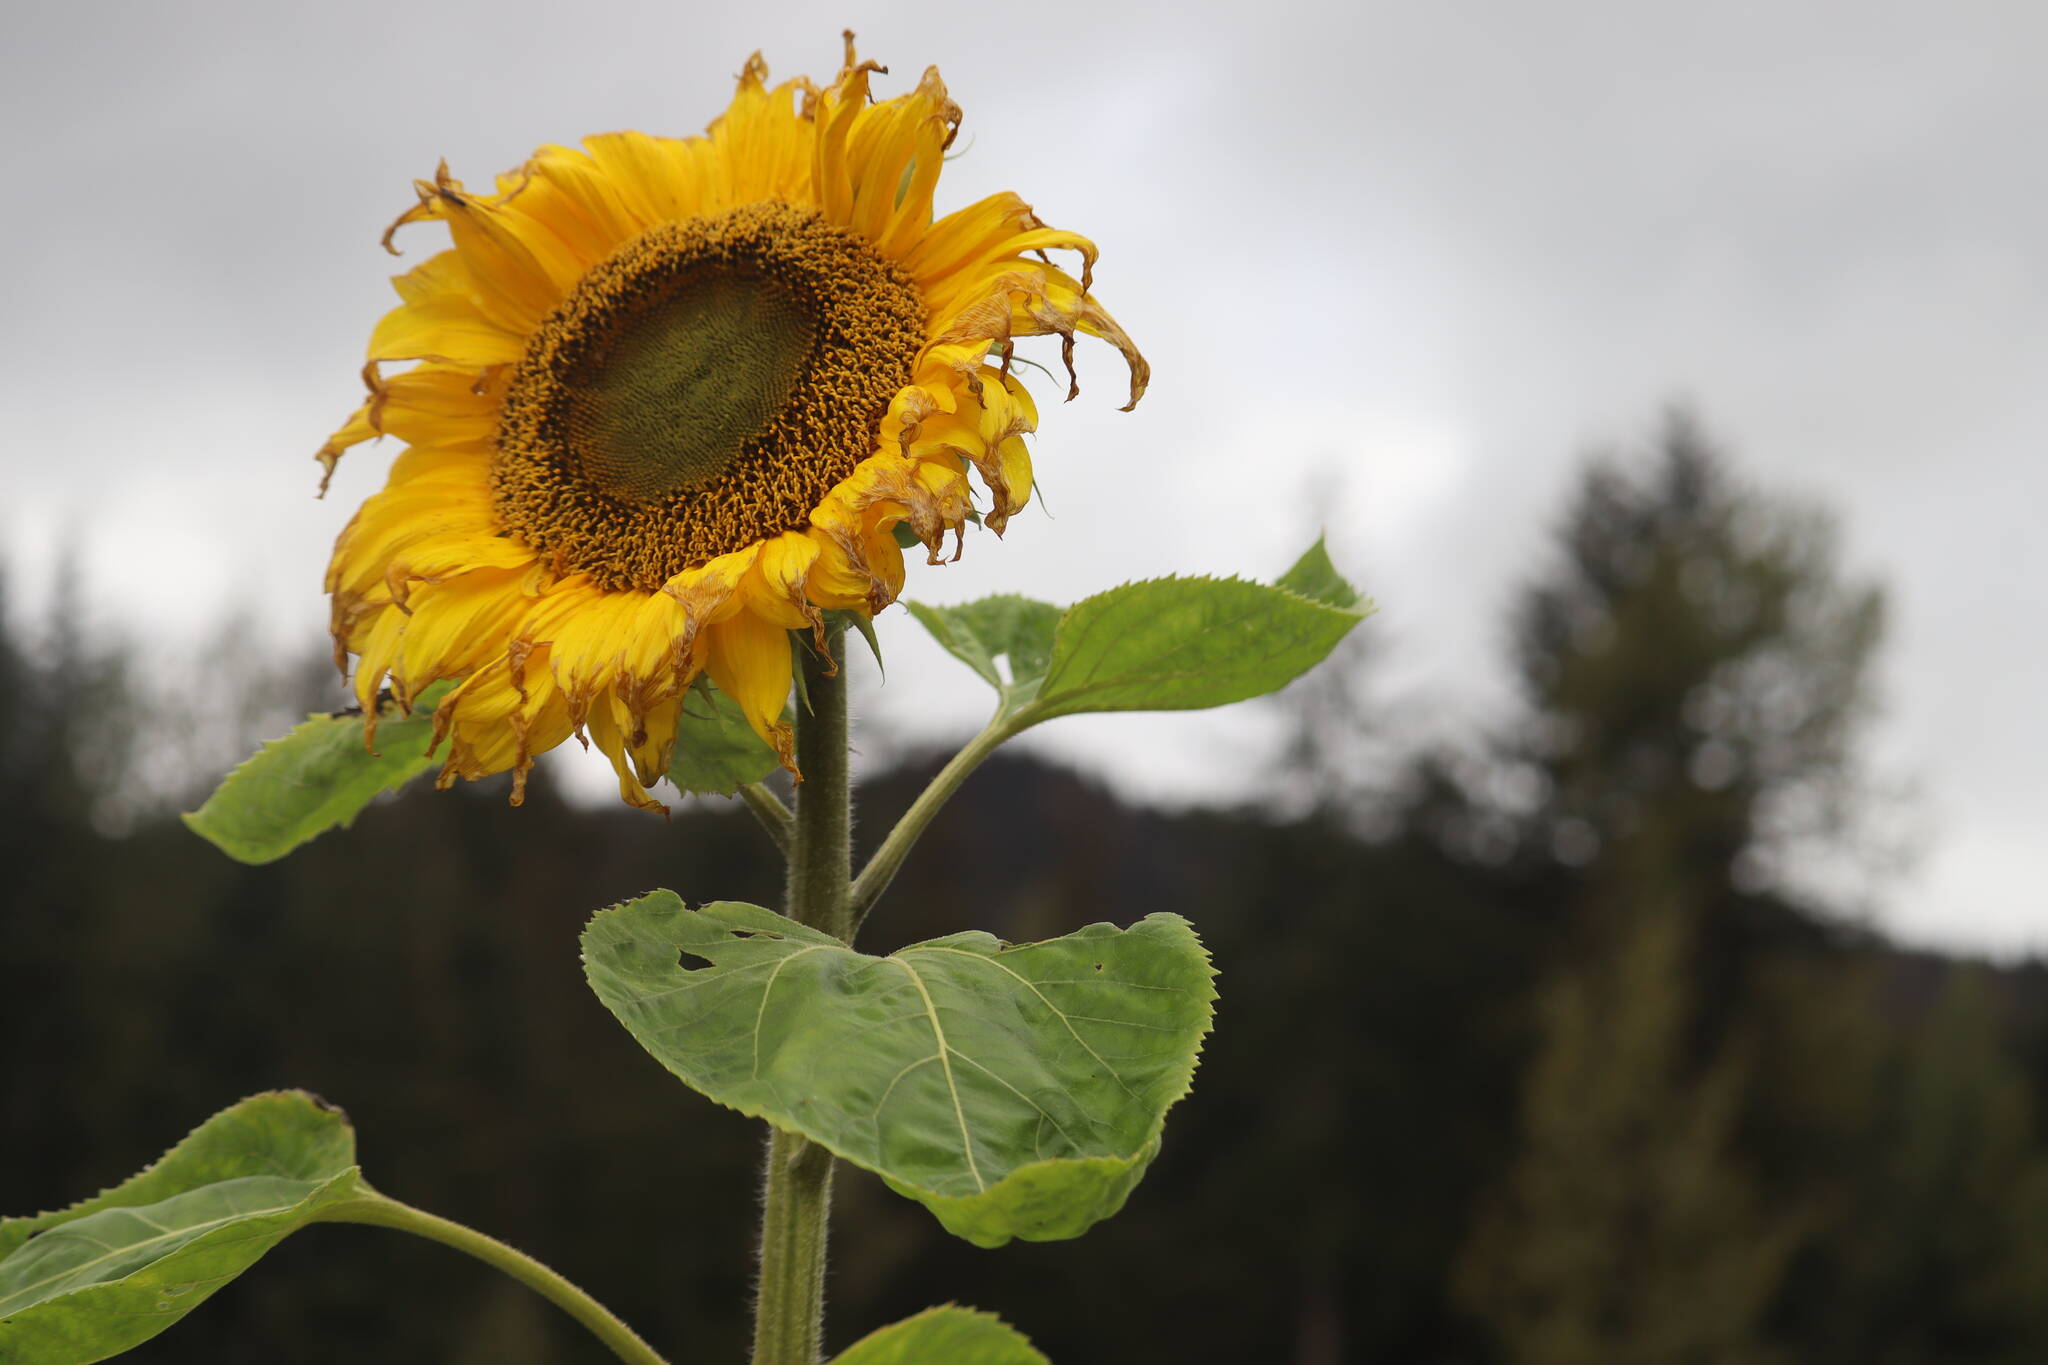 Another category judged at this year’s Harvest Fair was tallest sunflowers as shown in this photo. (Jonson Kuhn / Juneau Empire)